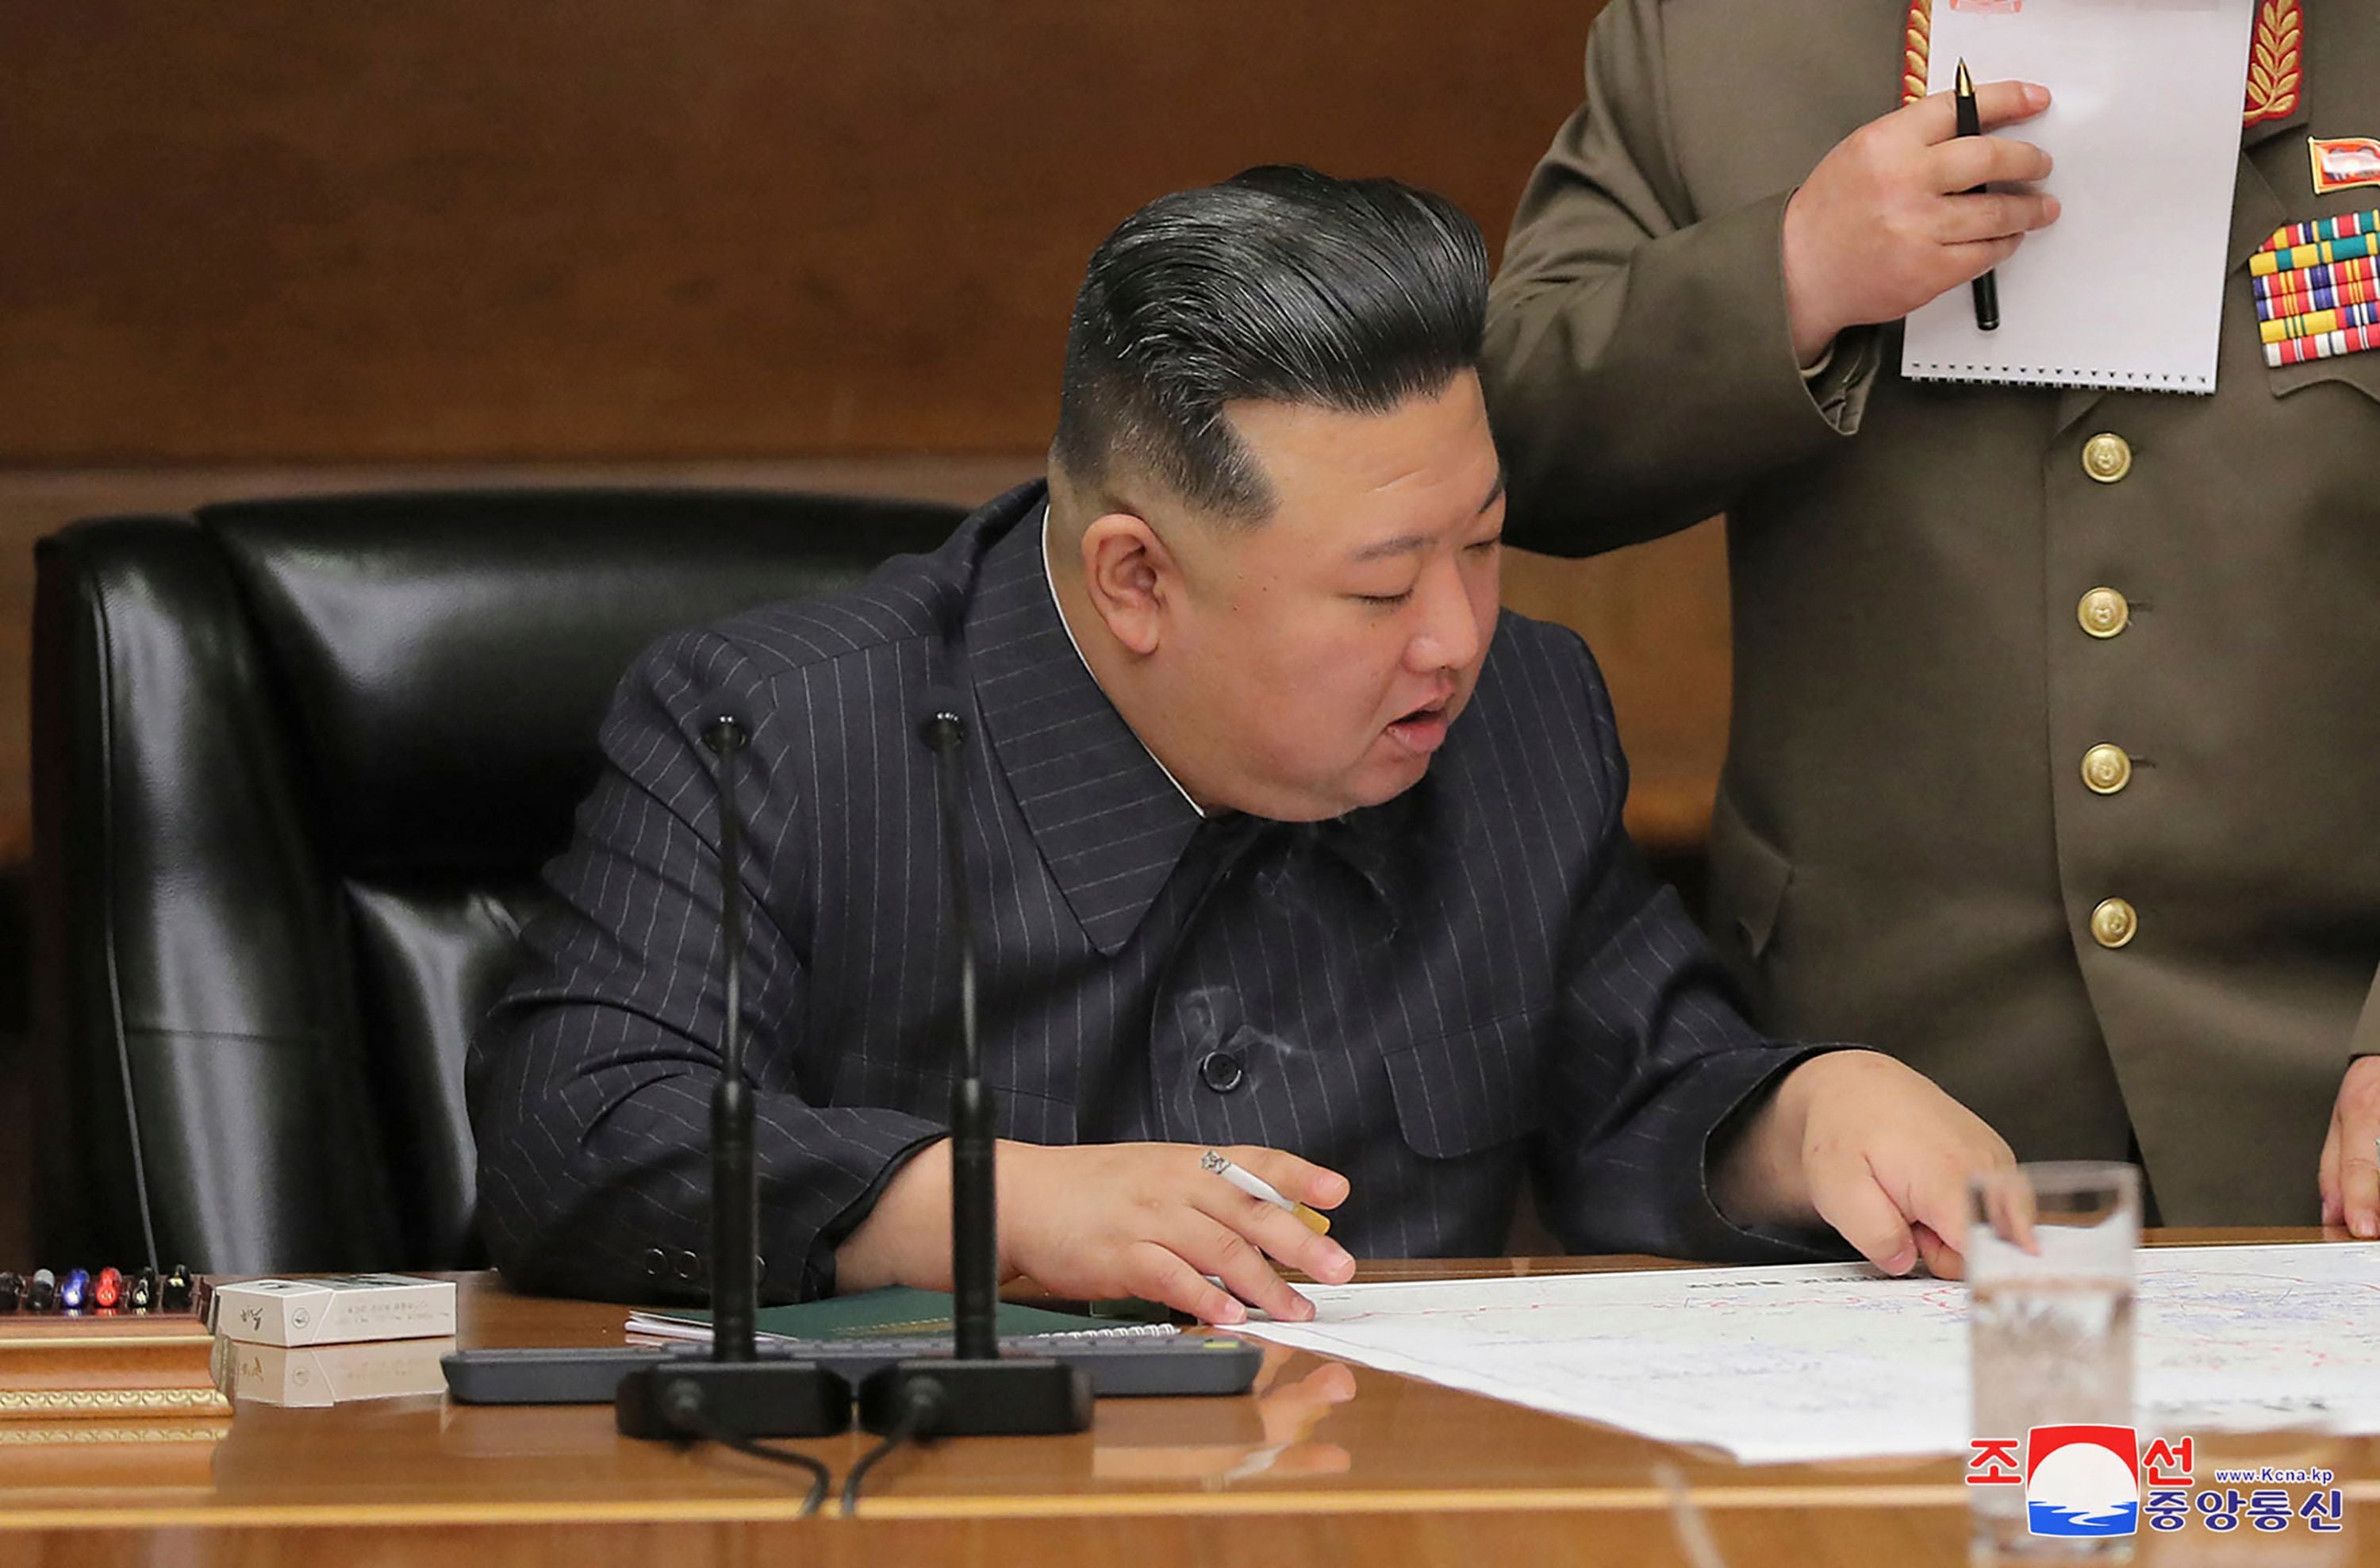 Kim Jong-un reviewed country’s frontline attack plans and various combat documents during the meeting